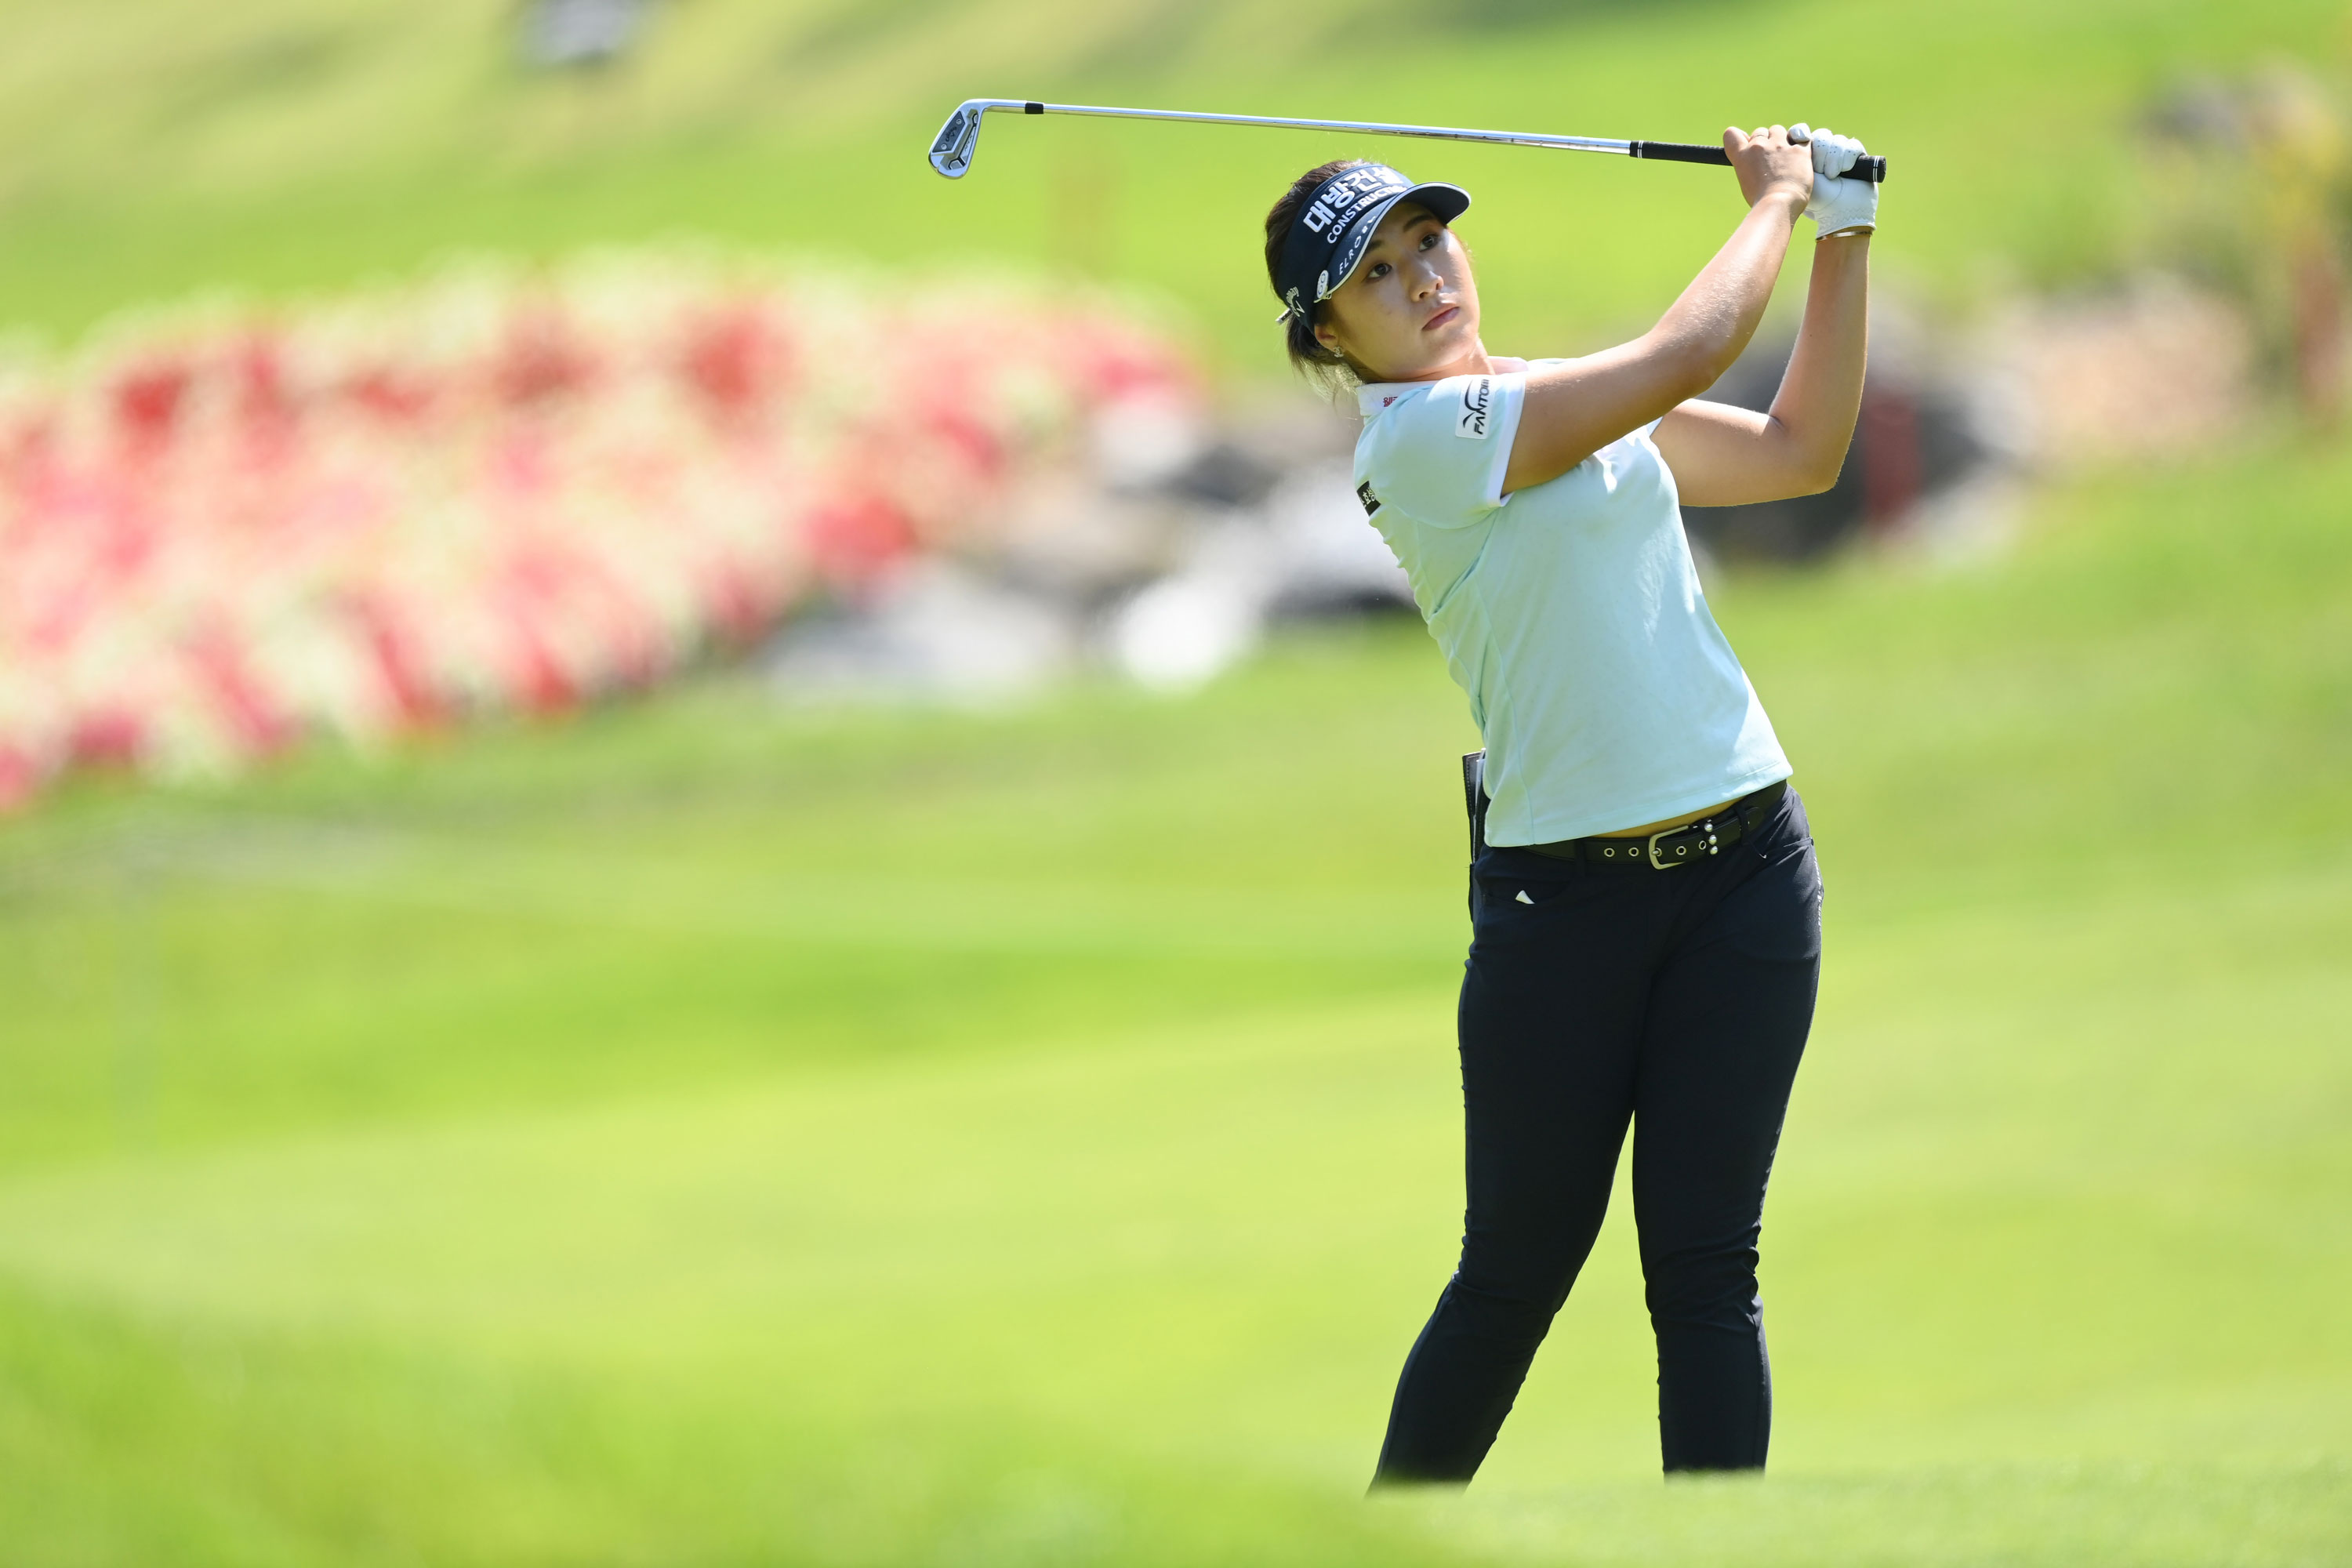 Jeongeun Lee6s 61 ties major-championship scoring record … and it could have been lower Golf News and Tour Information GolfDigest